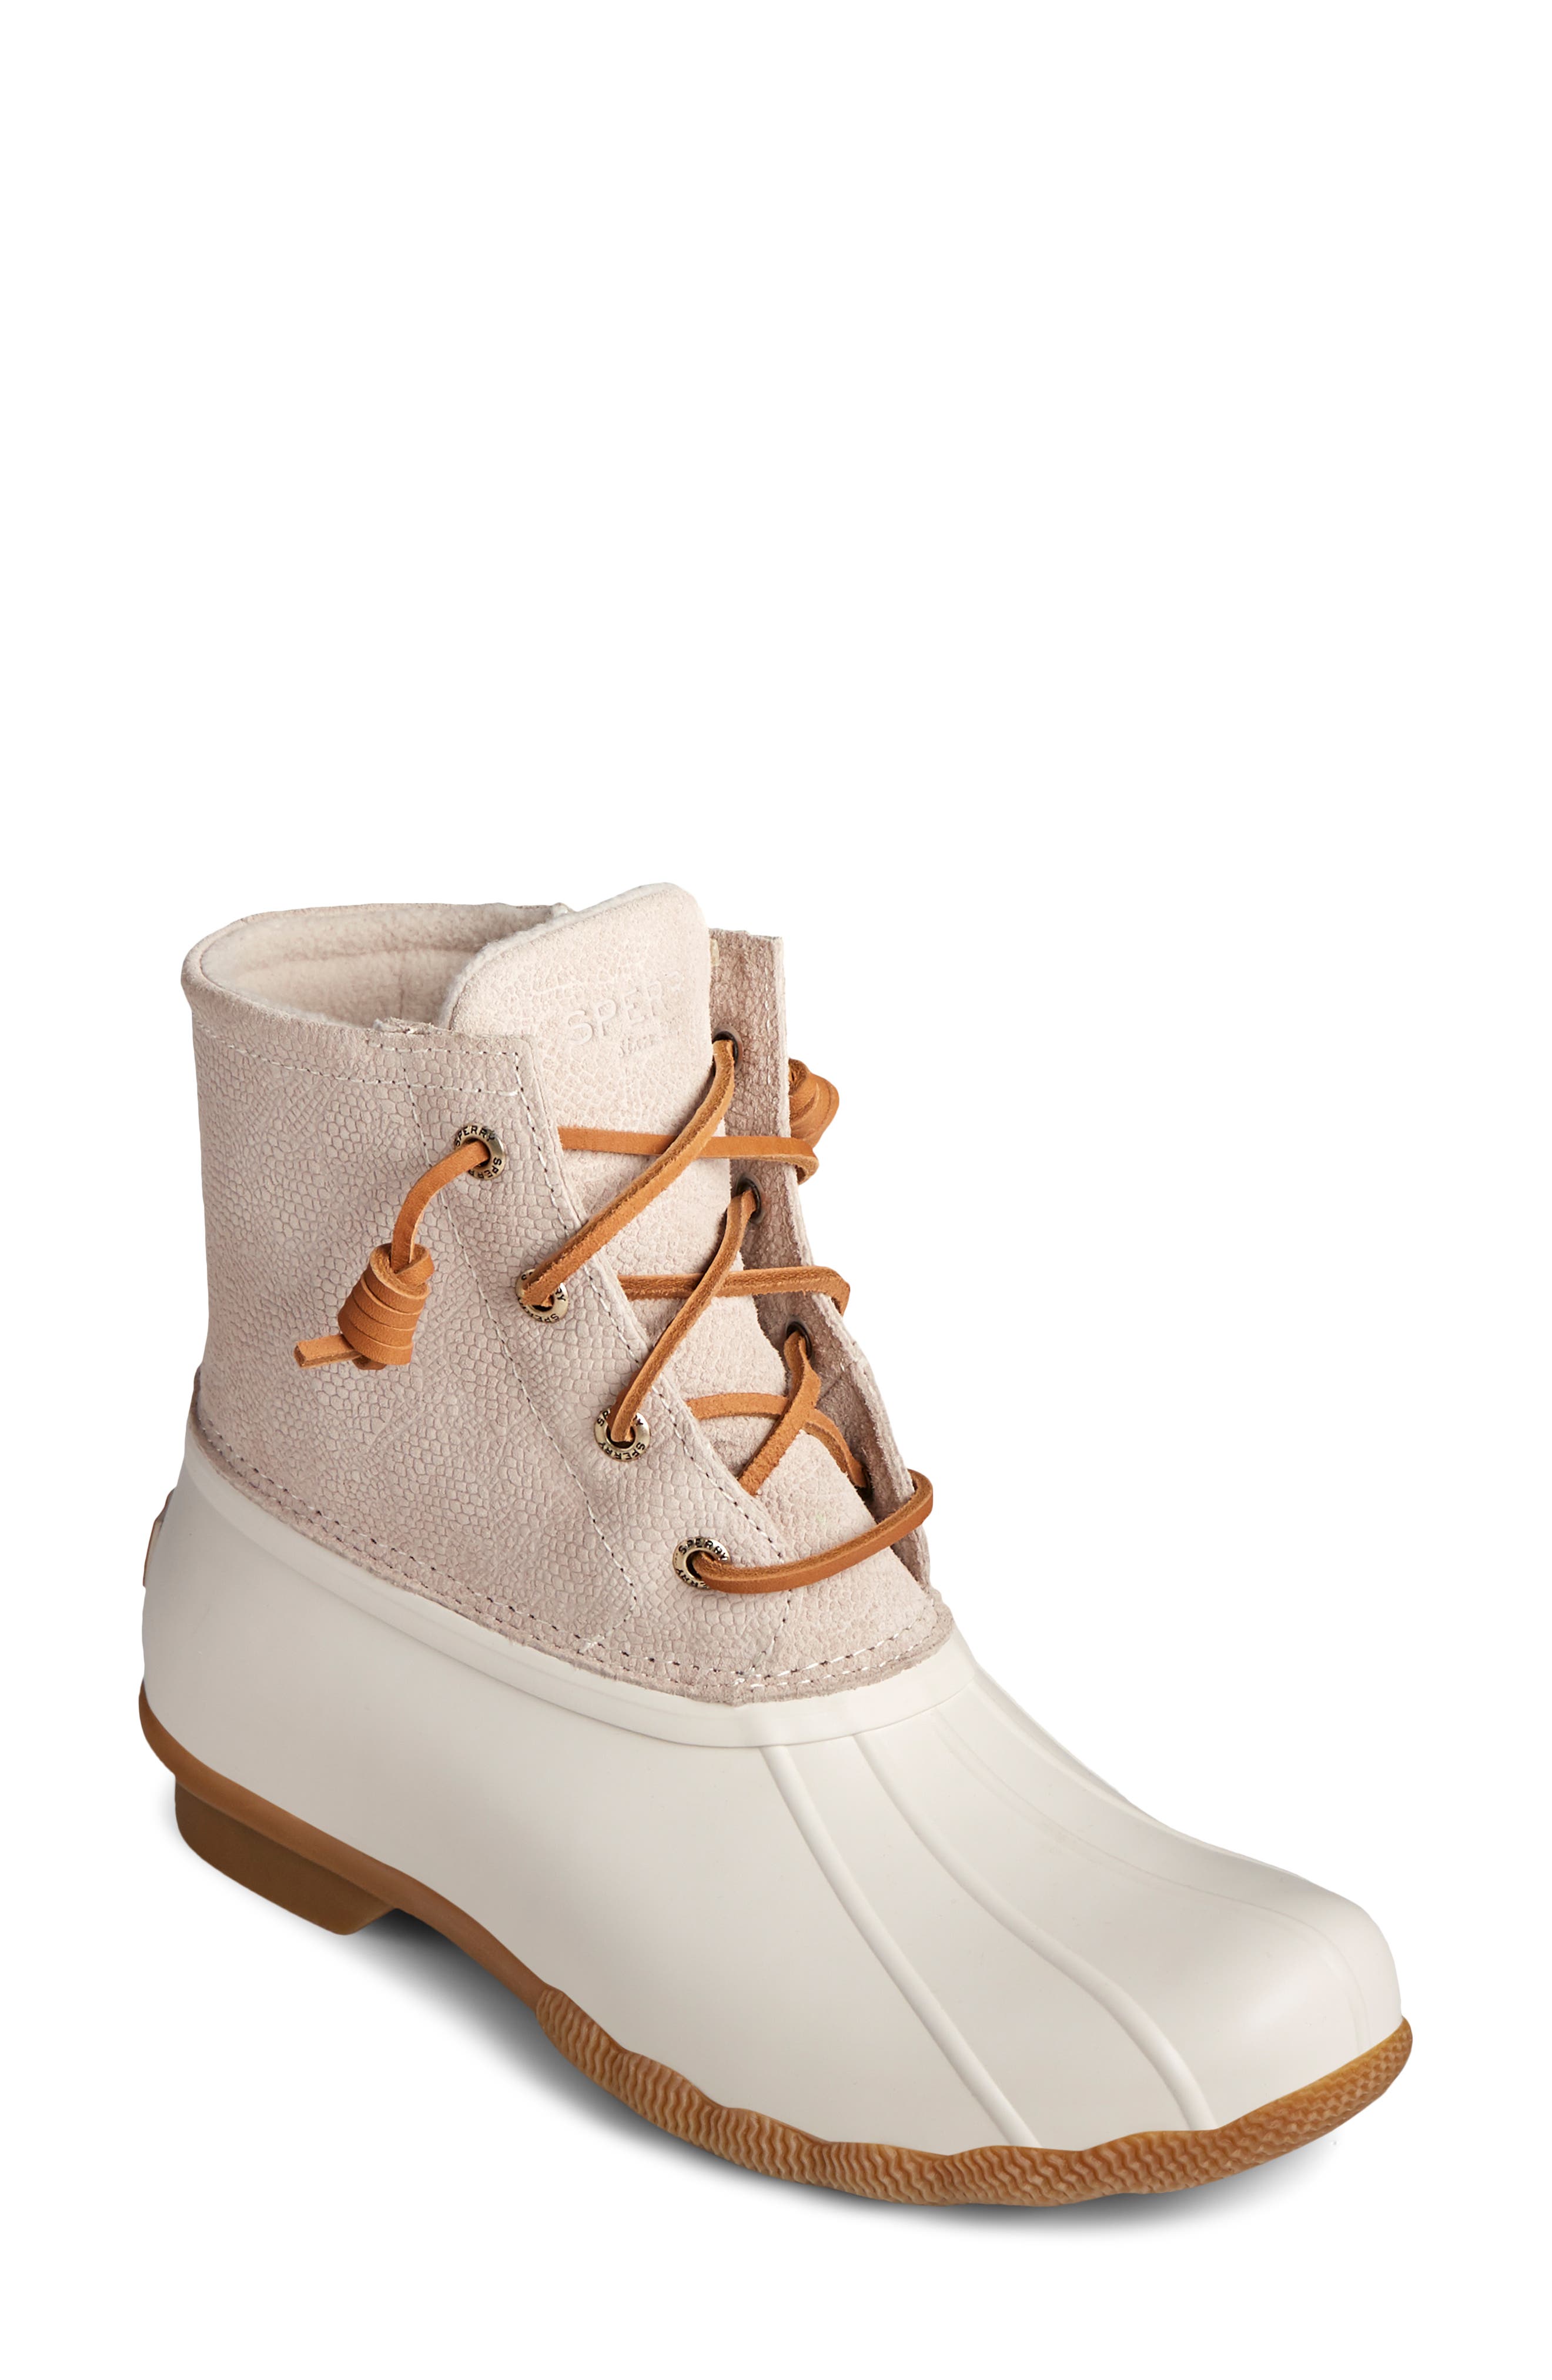 sperry rain boots clearance